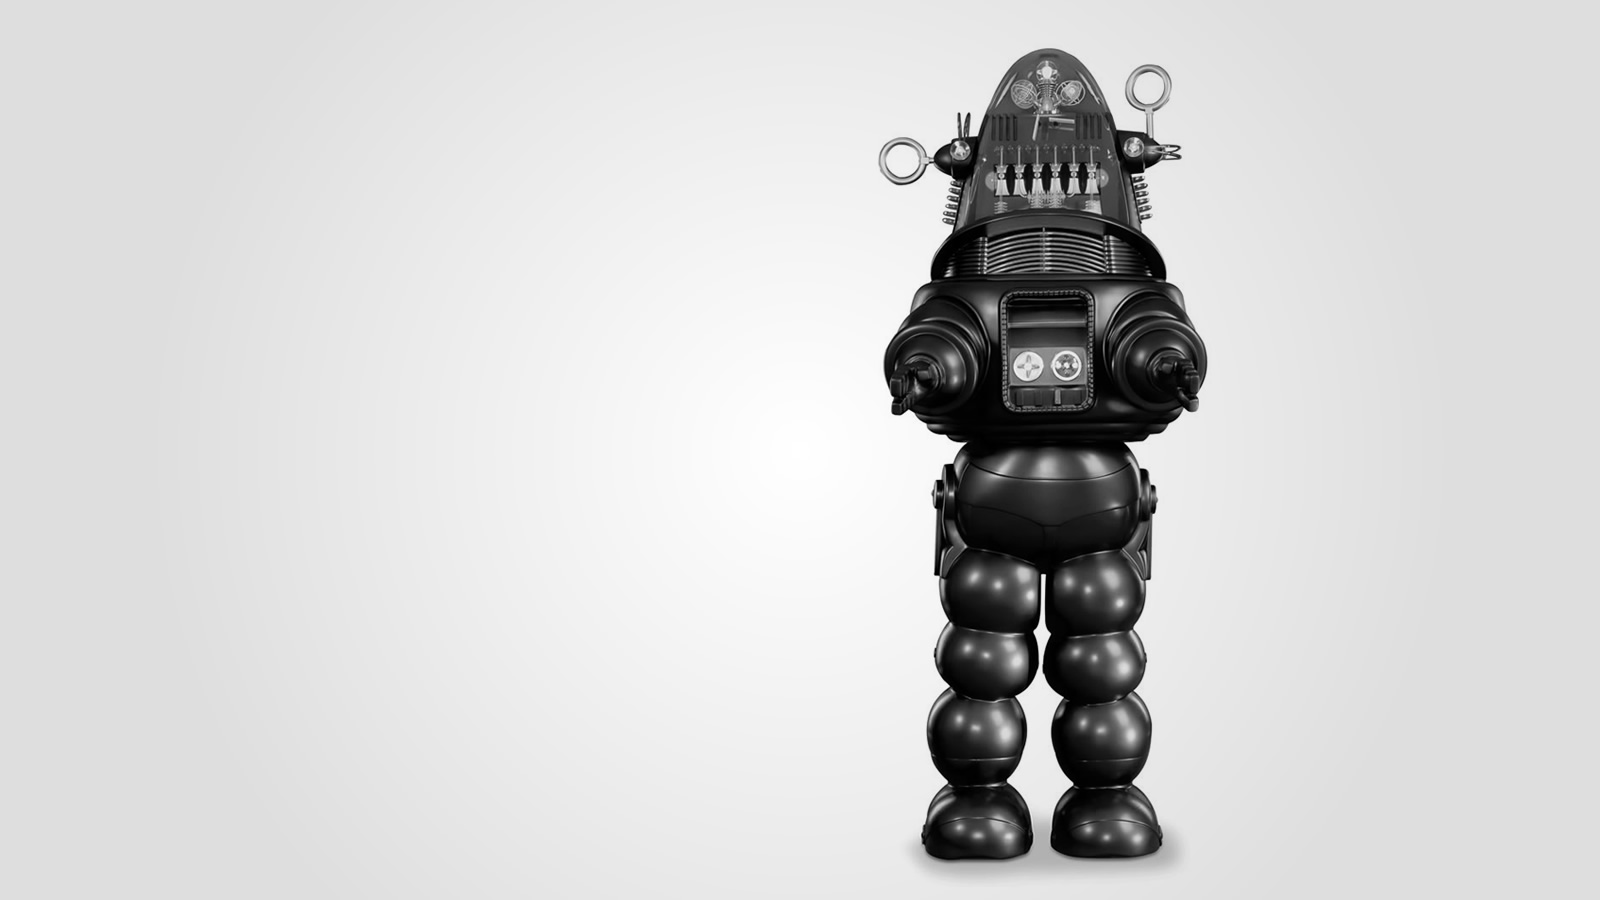 Robby the Robot from the 1956 movie Forbidden Planet